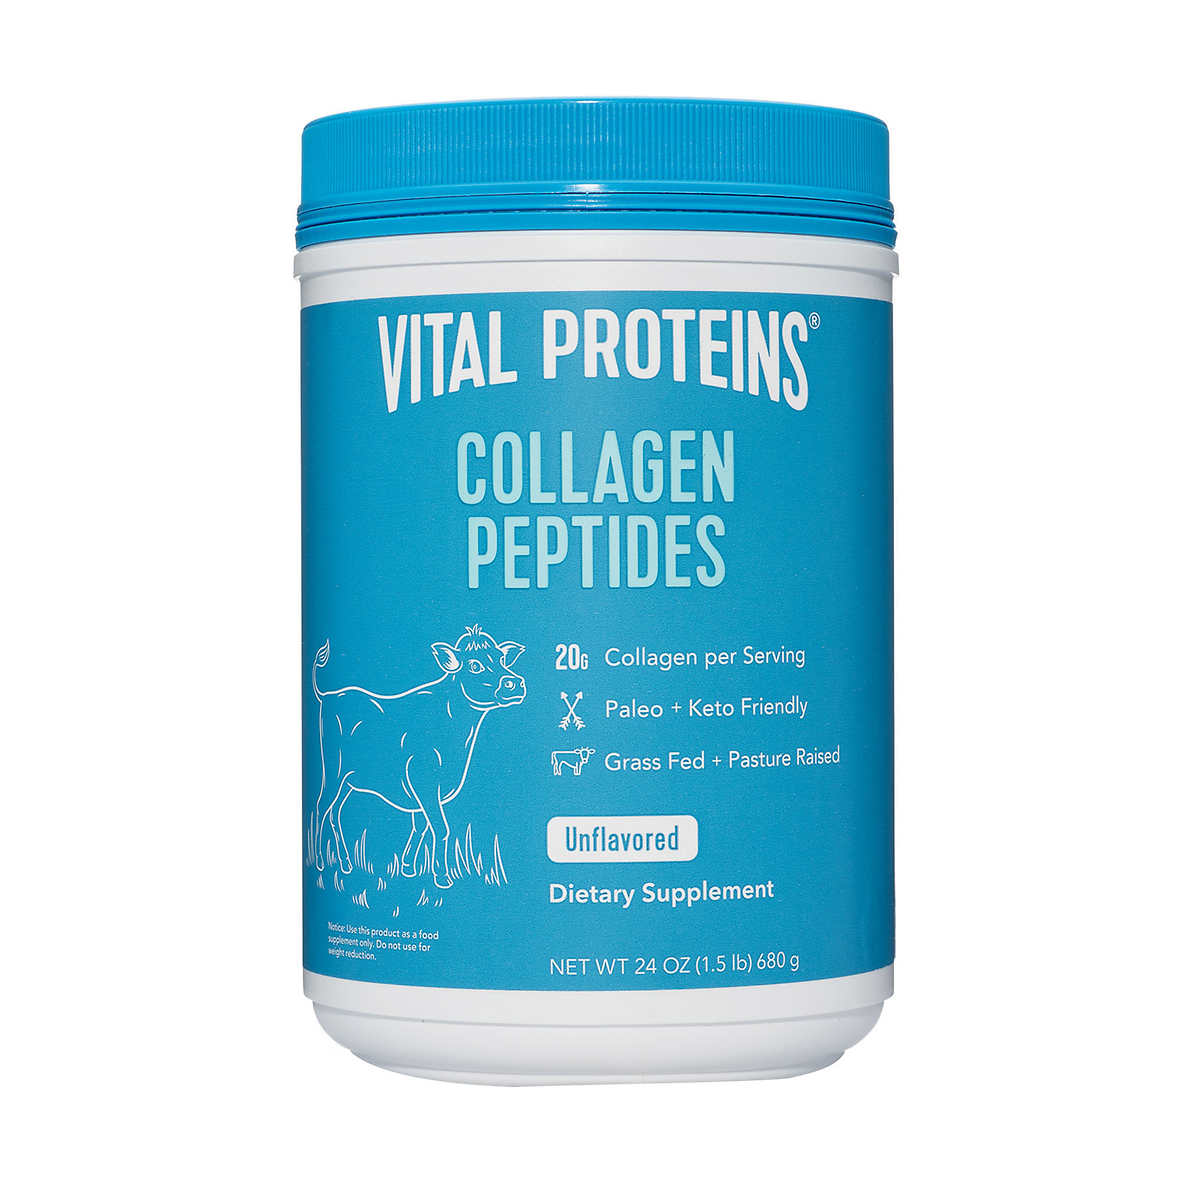 Vital Proteins Collagen Peptides Unflavored 24 0 Oz,Smart Home Systems Reviews